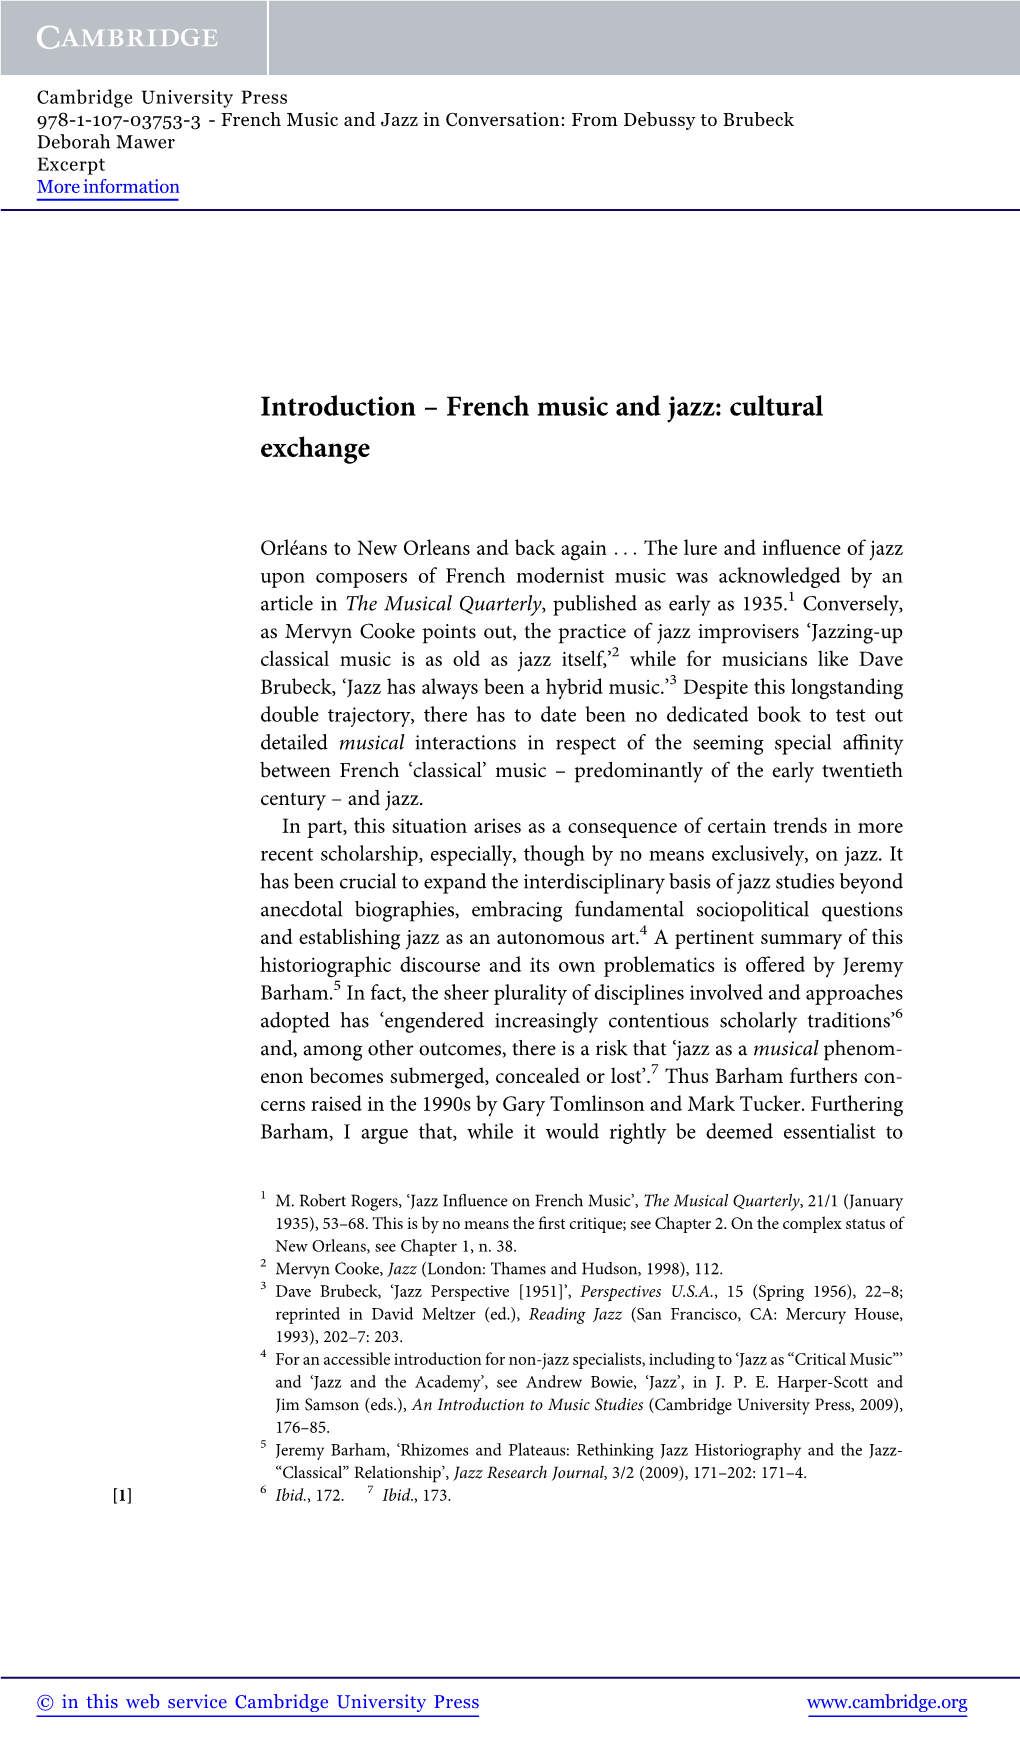 French Music and Jazz in Conversation: from Debussy to Brubeck Deborah Mawer Excerpt More Information